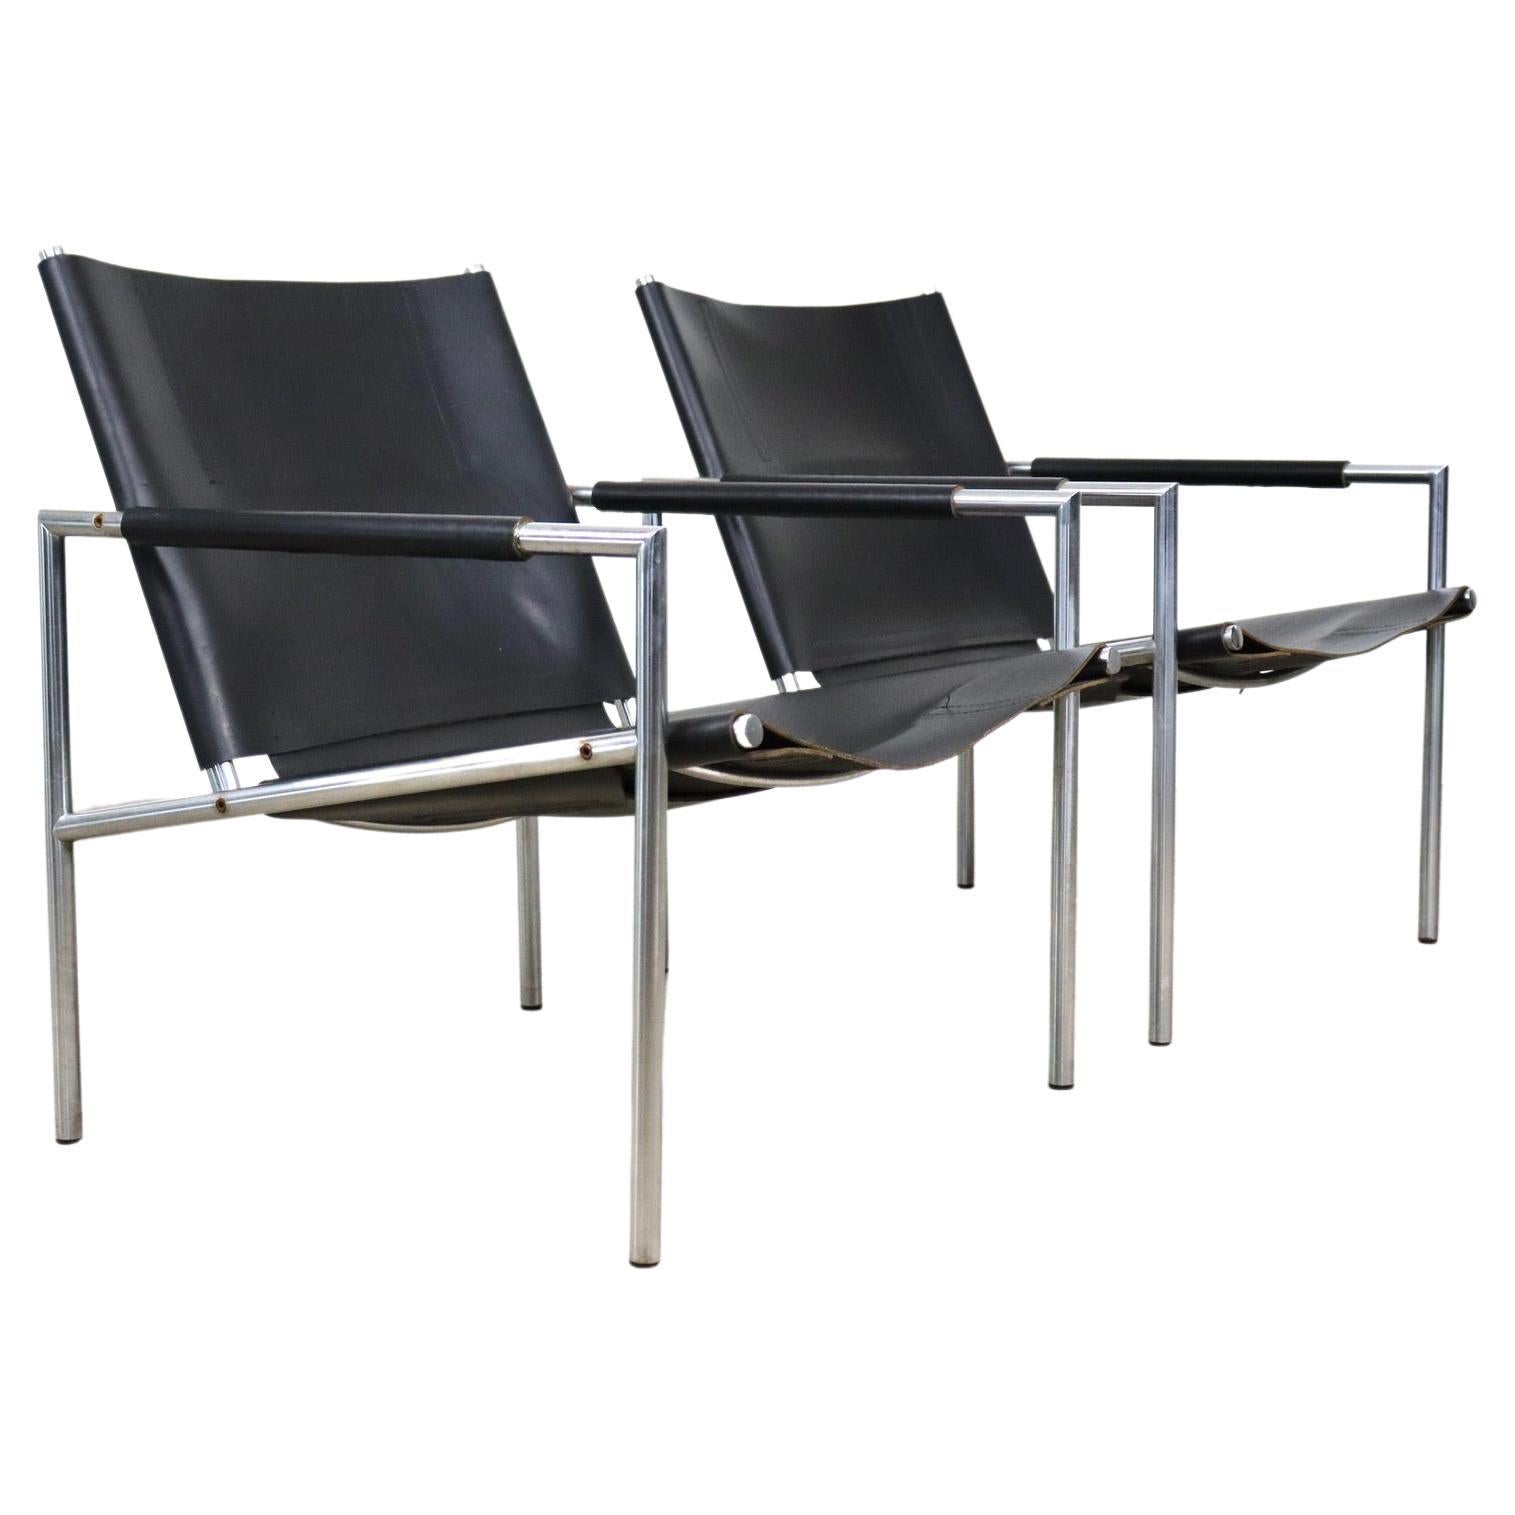 Pair of SZ02 Easy chairs by Martin Visser for Spectrum, 1970s